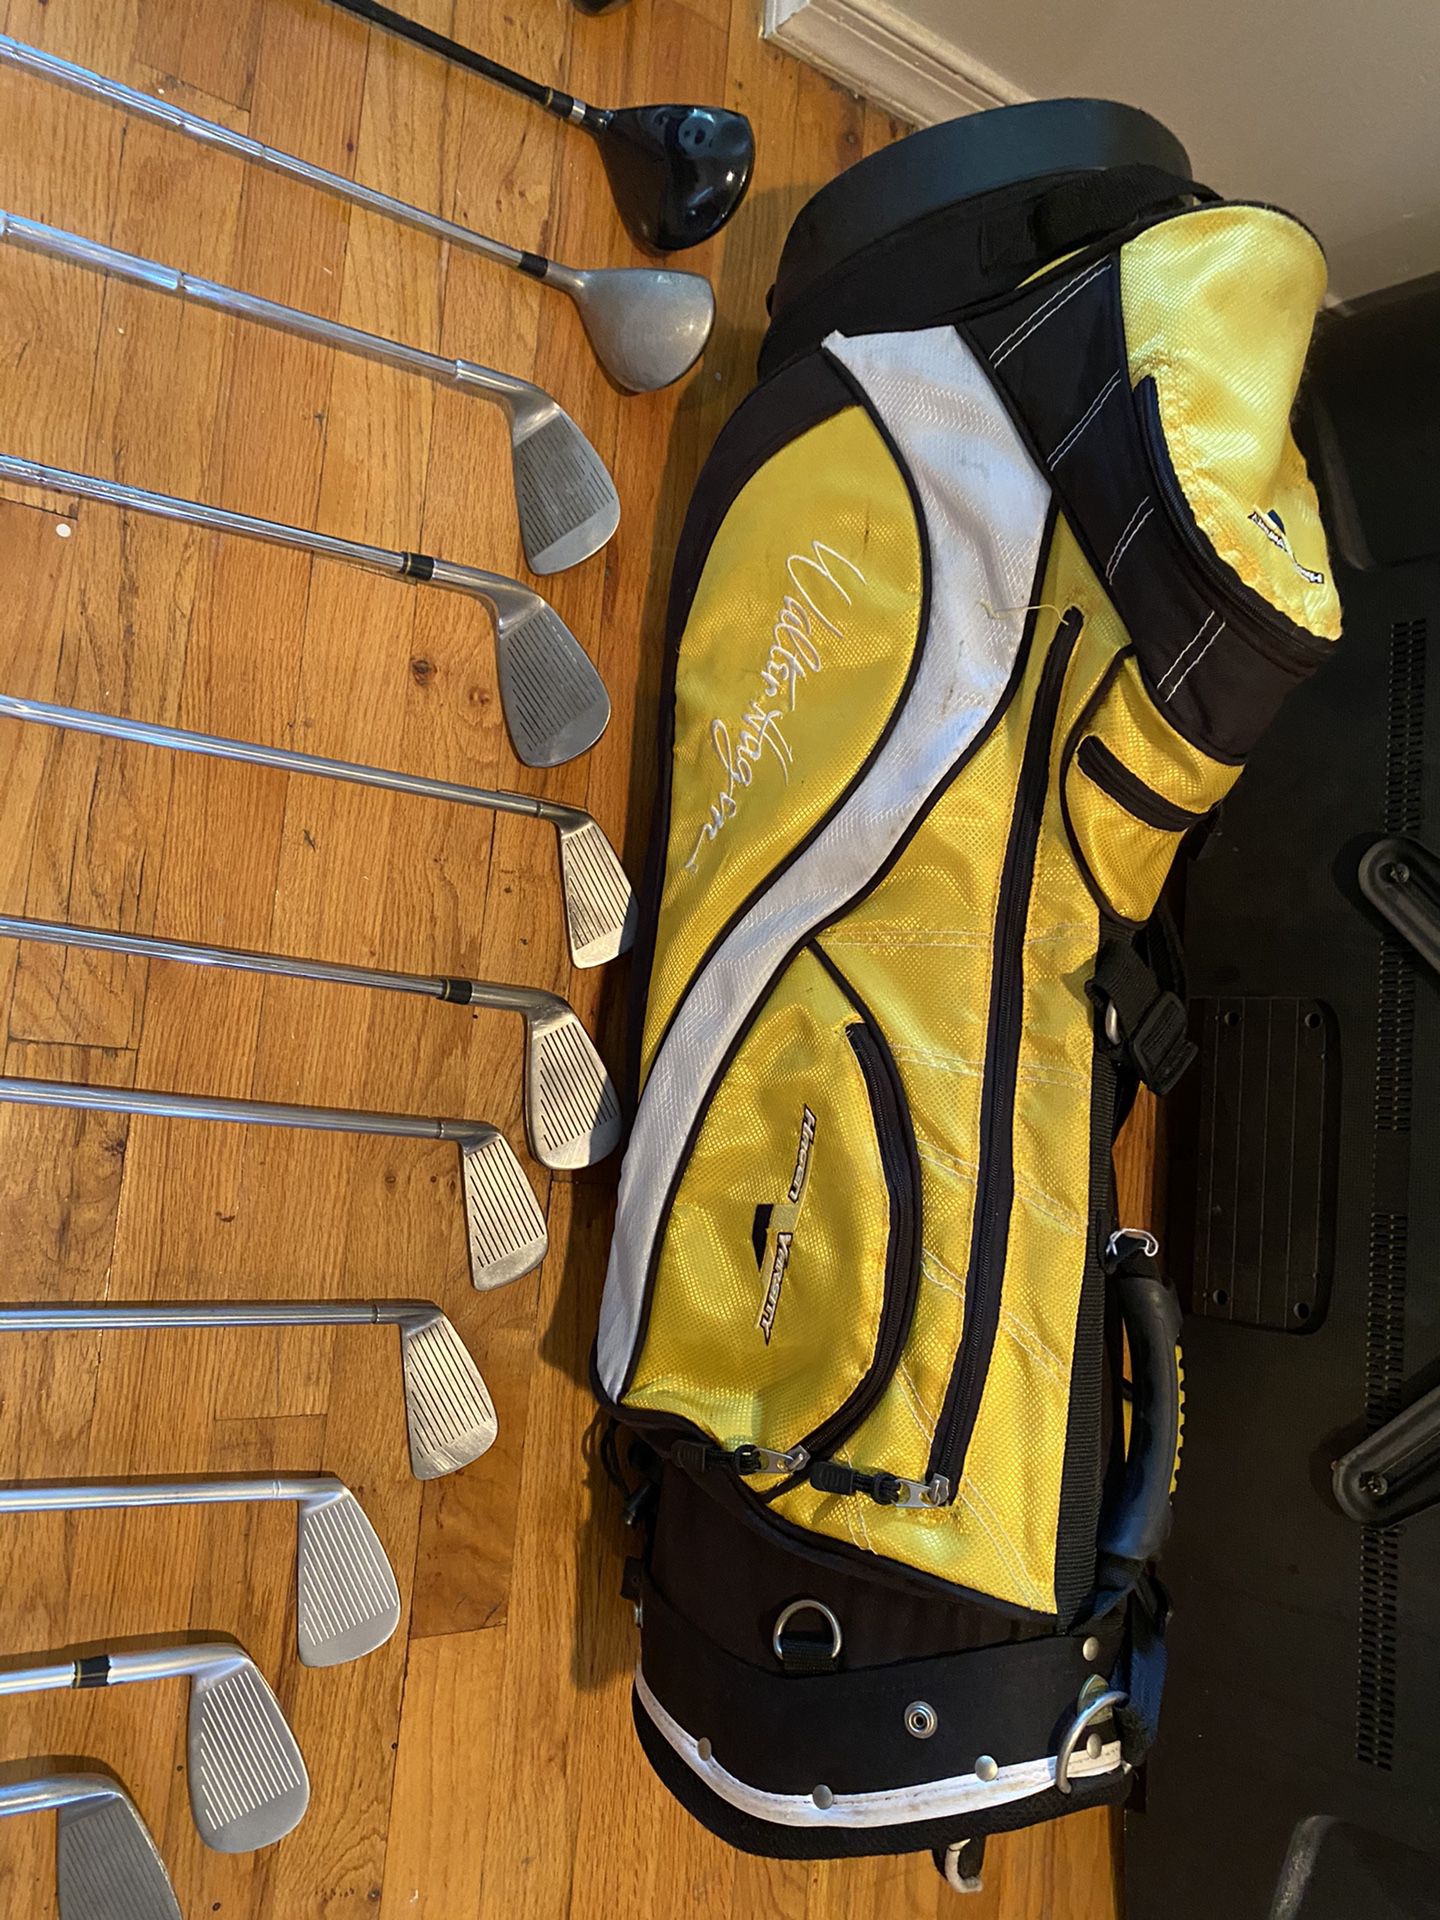 Wilson golf club with bag and 12 bars